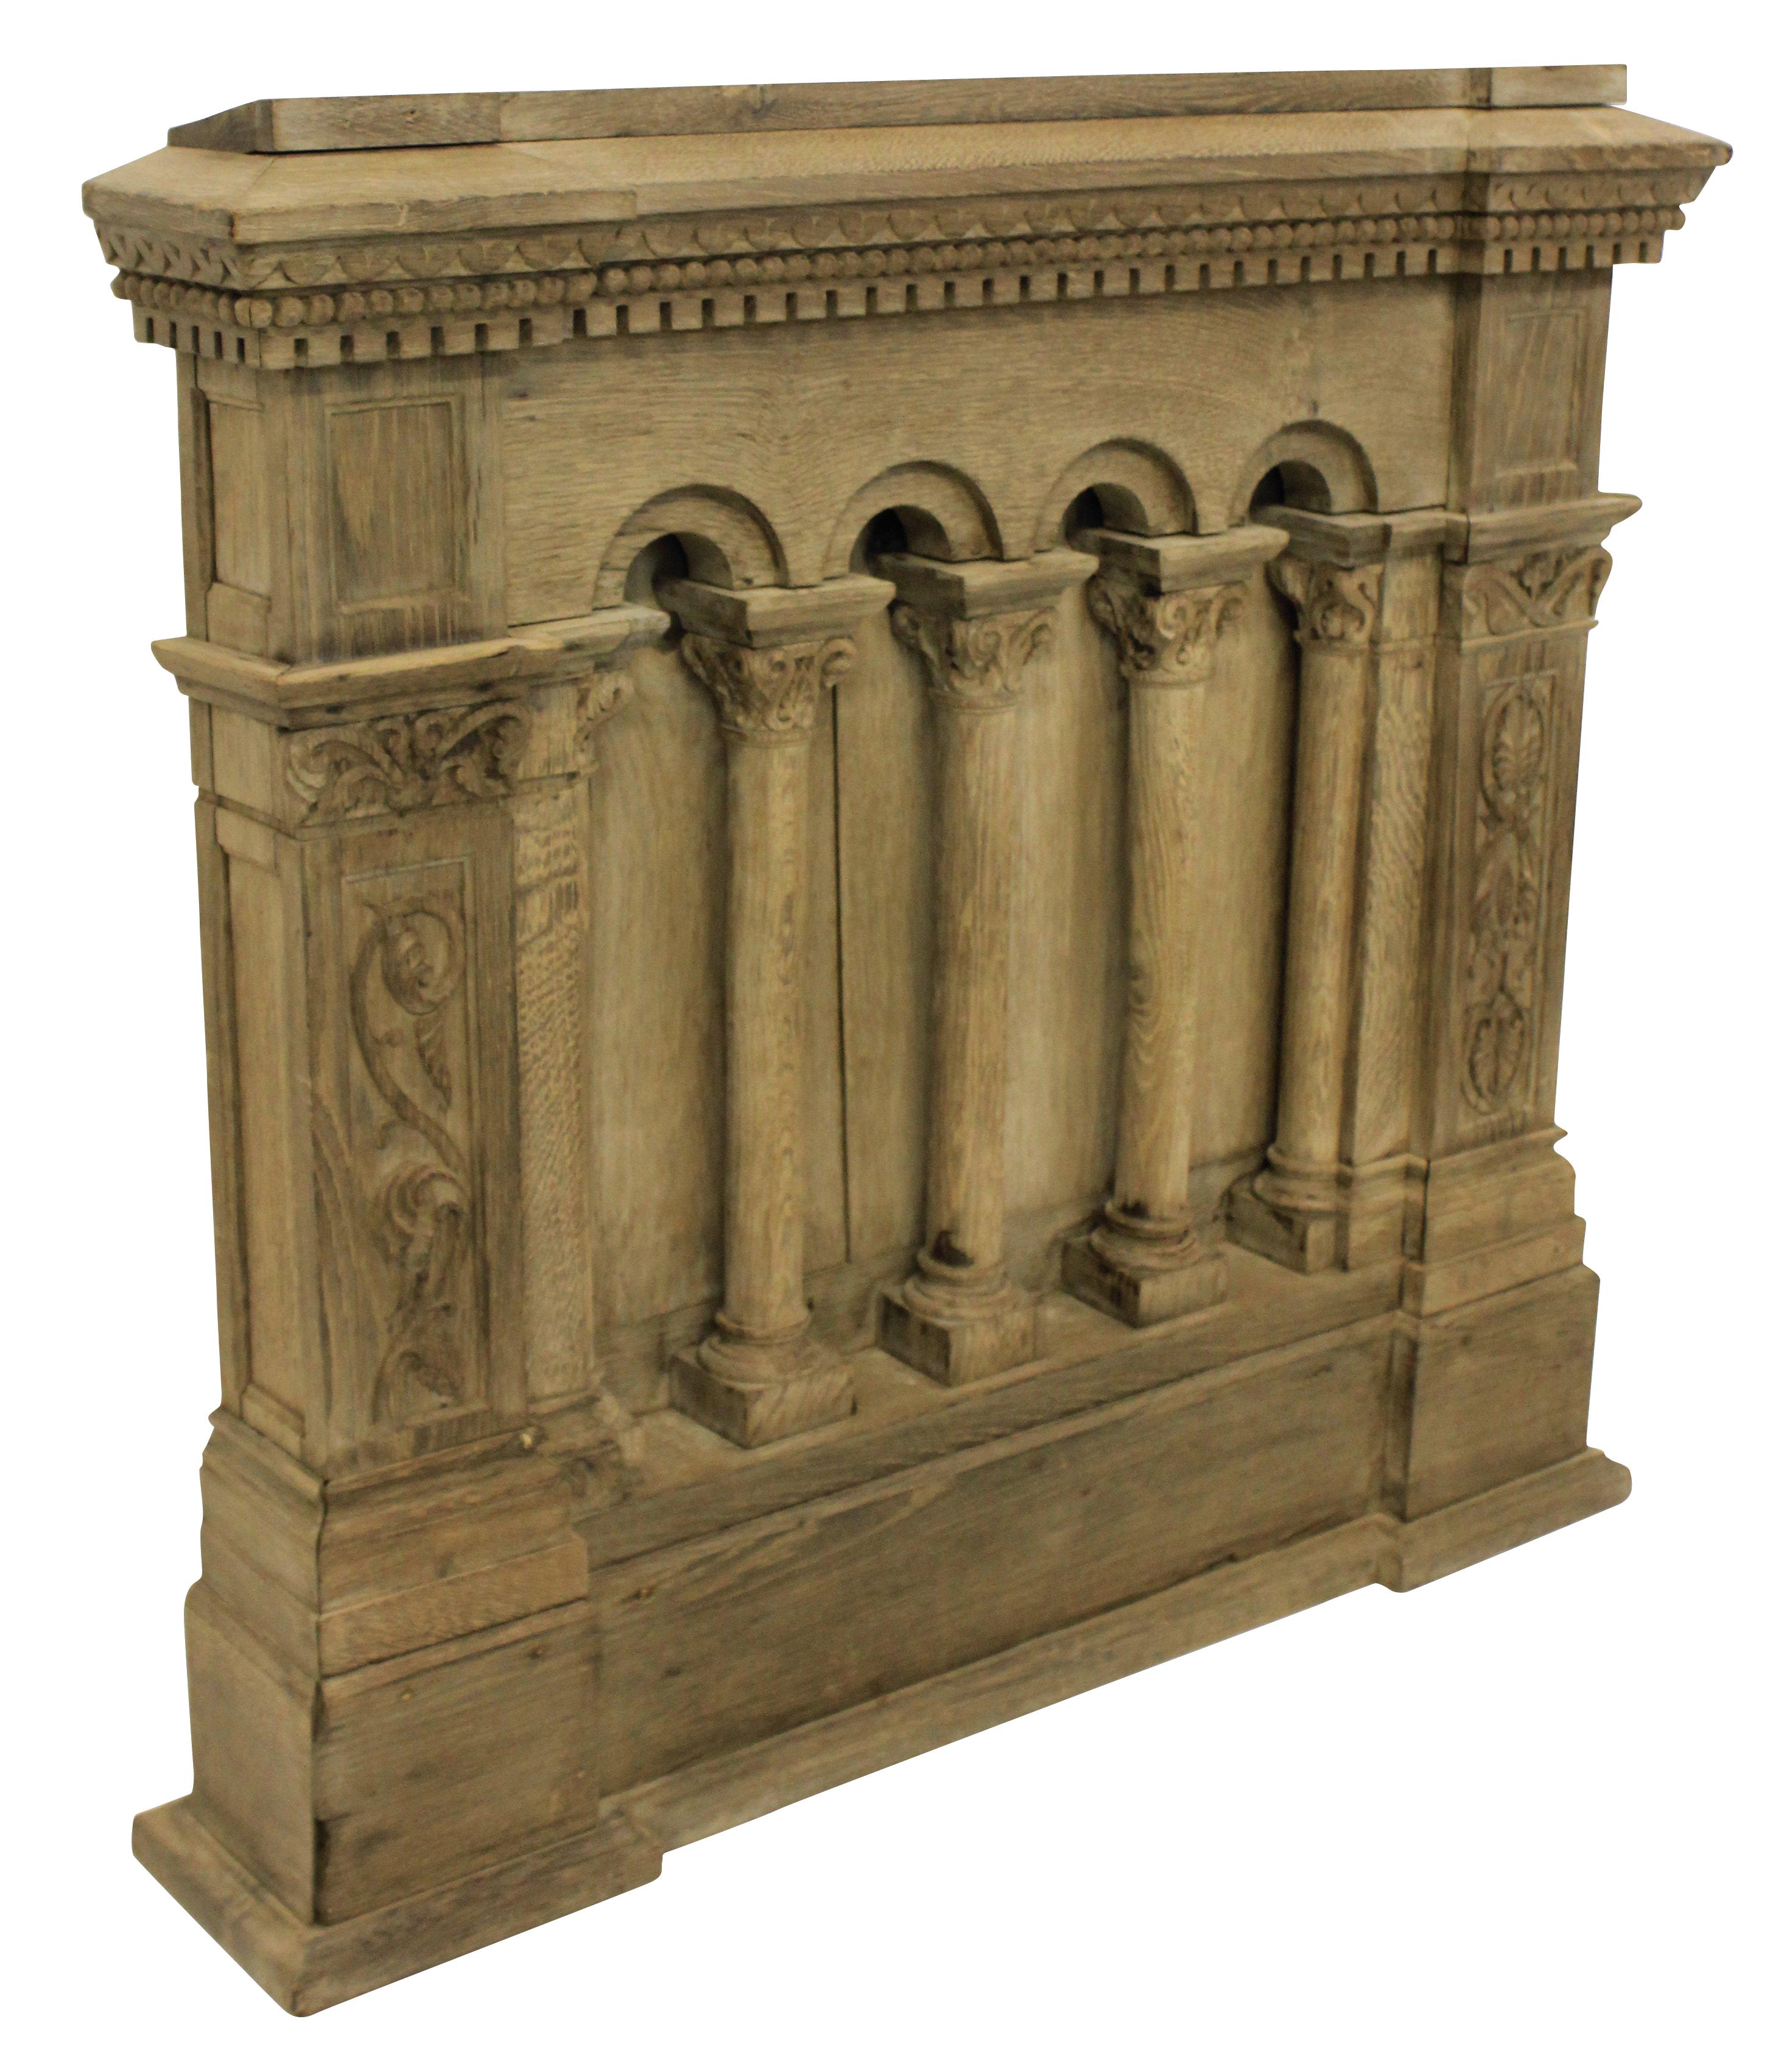 French bleached oak Romanesque carving, formerly the front of a church choir stall.